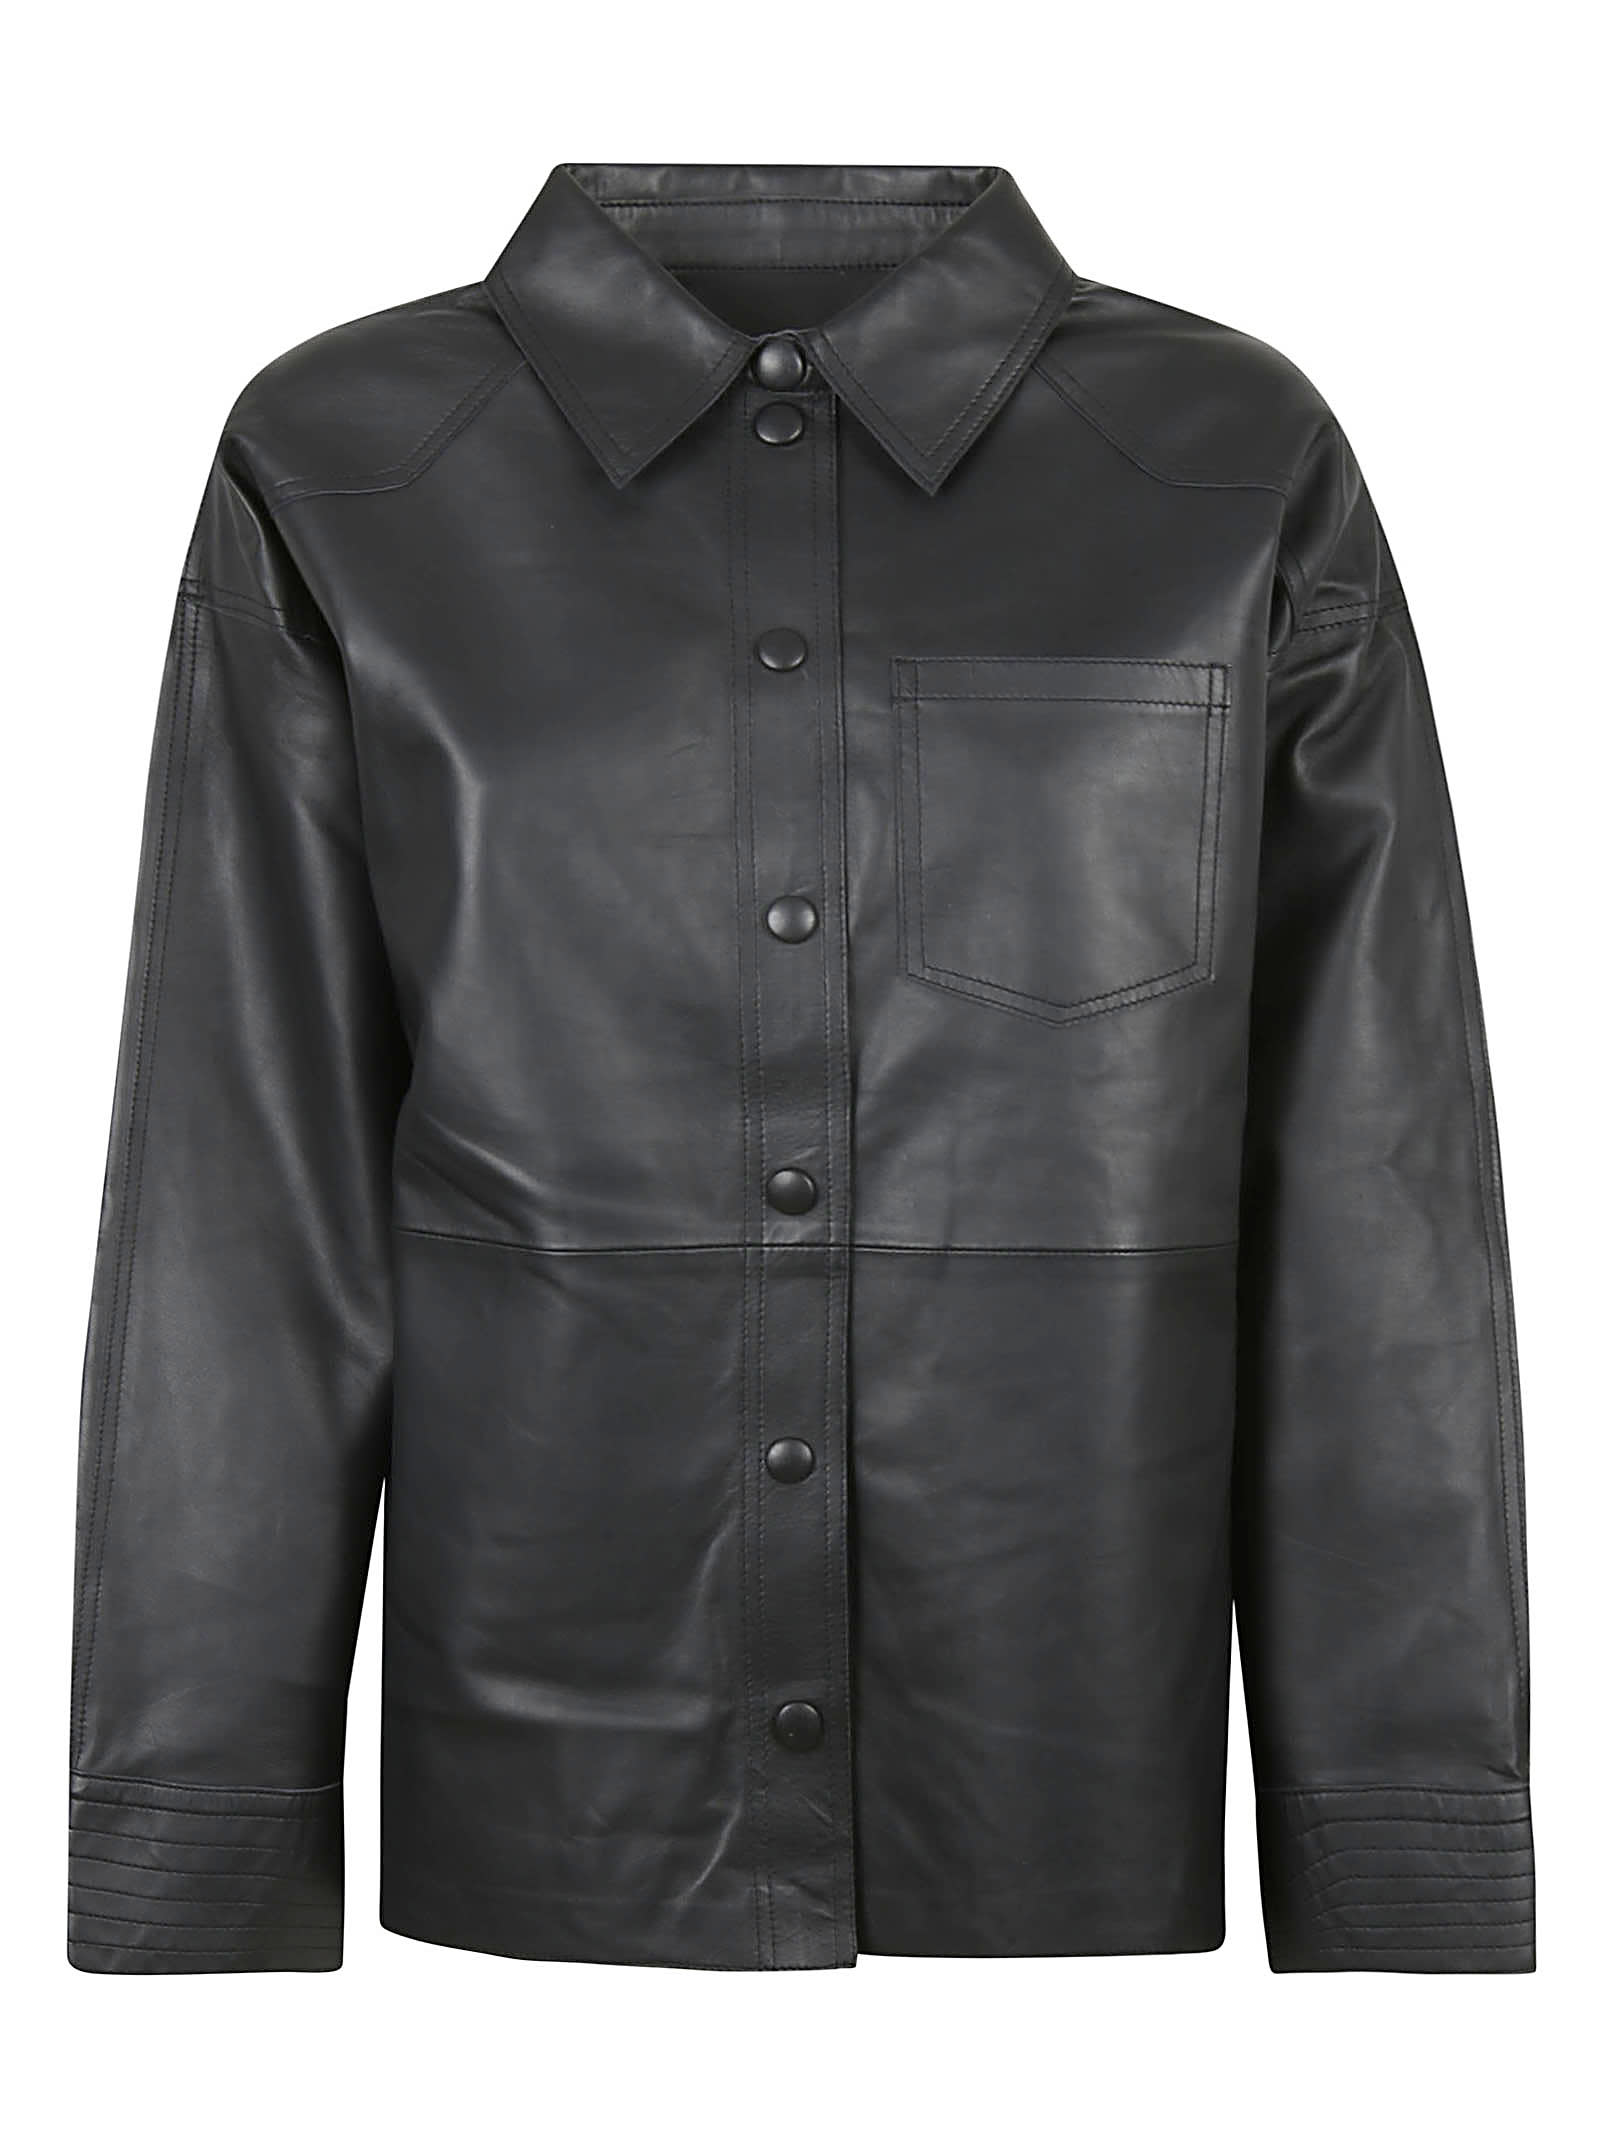 S.W.O.R.D 6.6.44 Classic Buttoned Leather Jacket